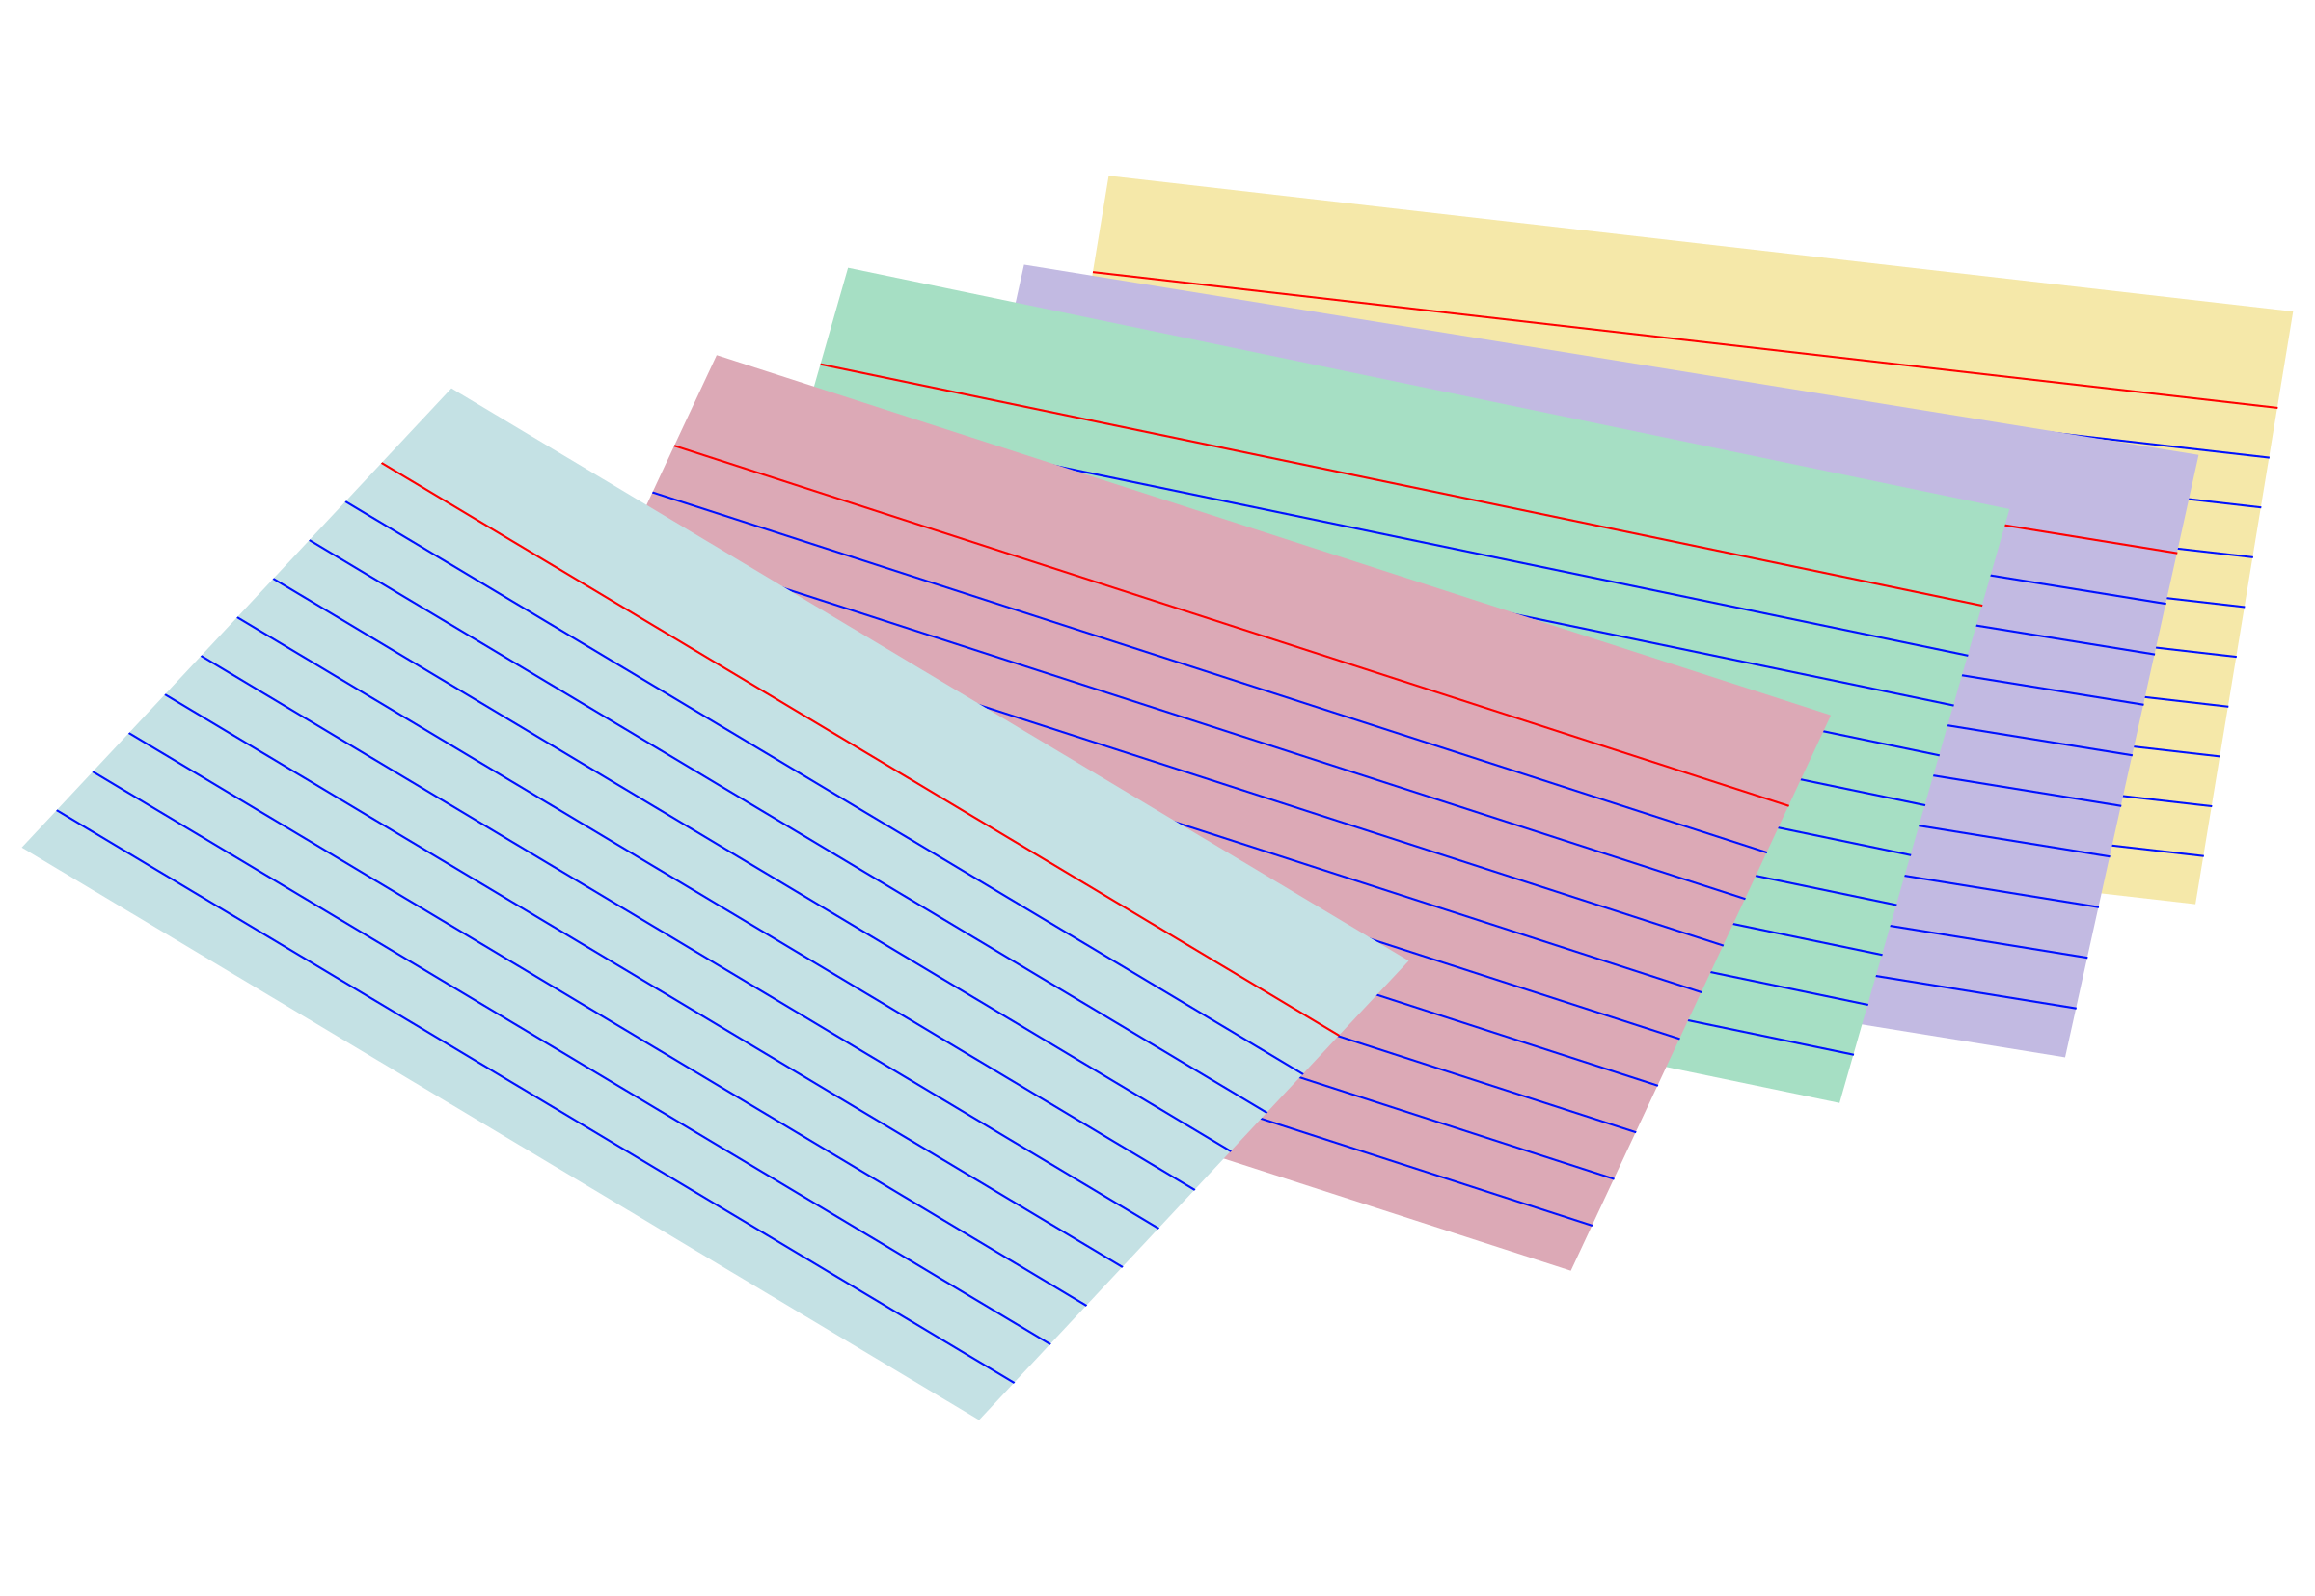 paper clipart colored paper